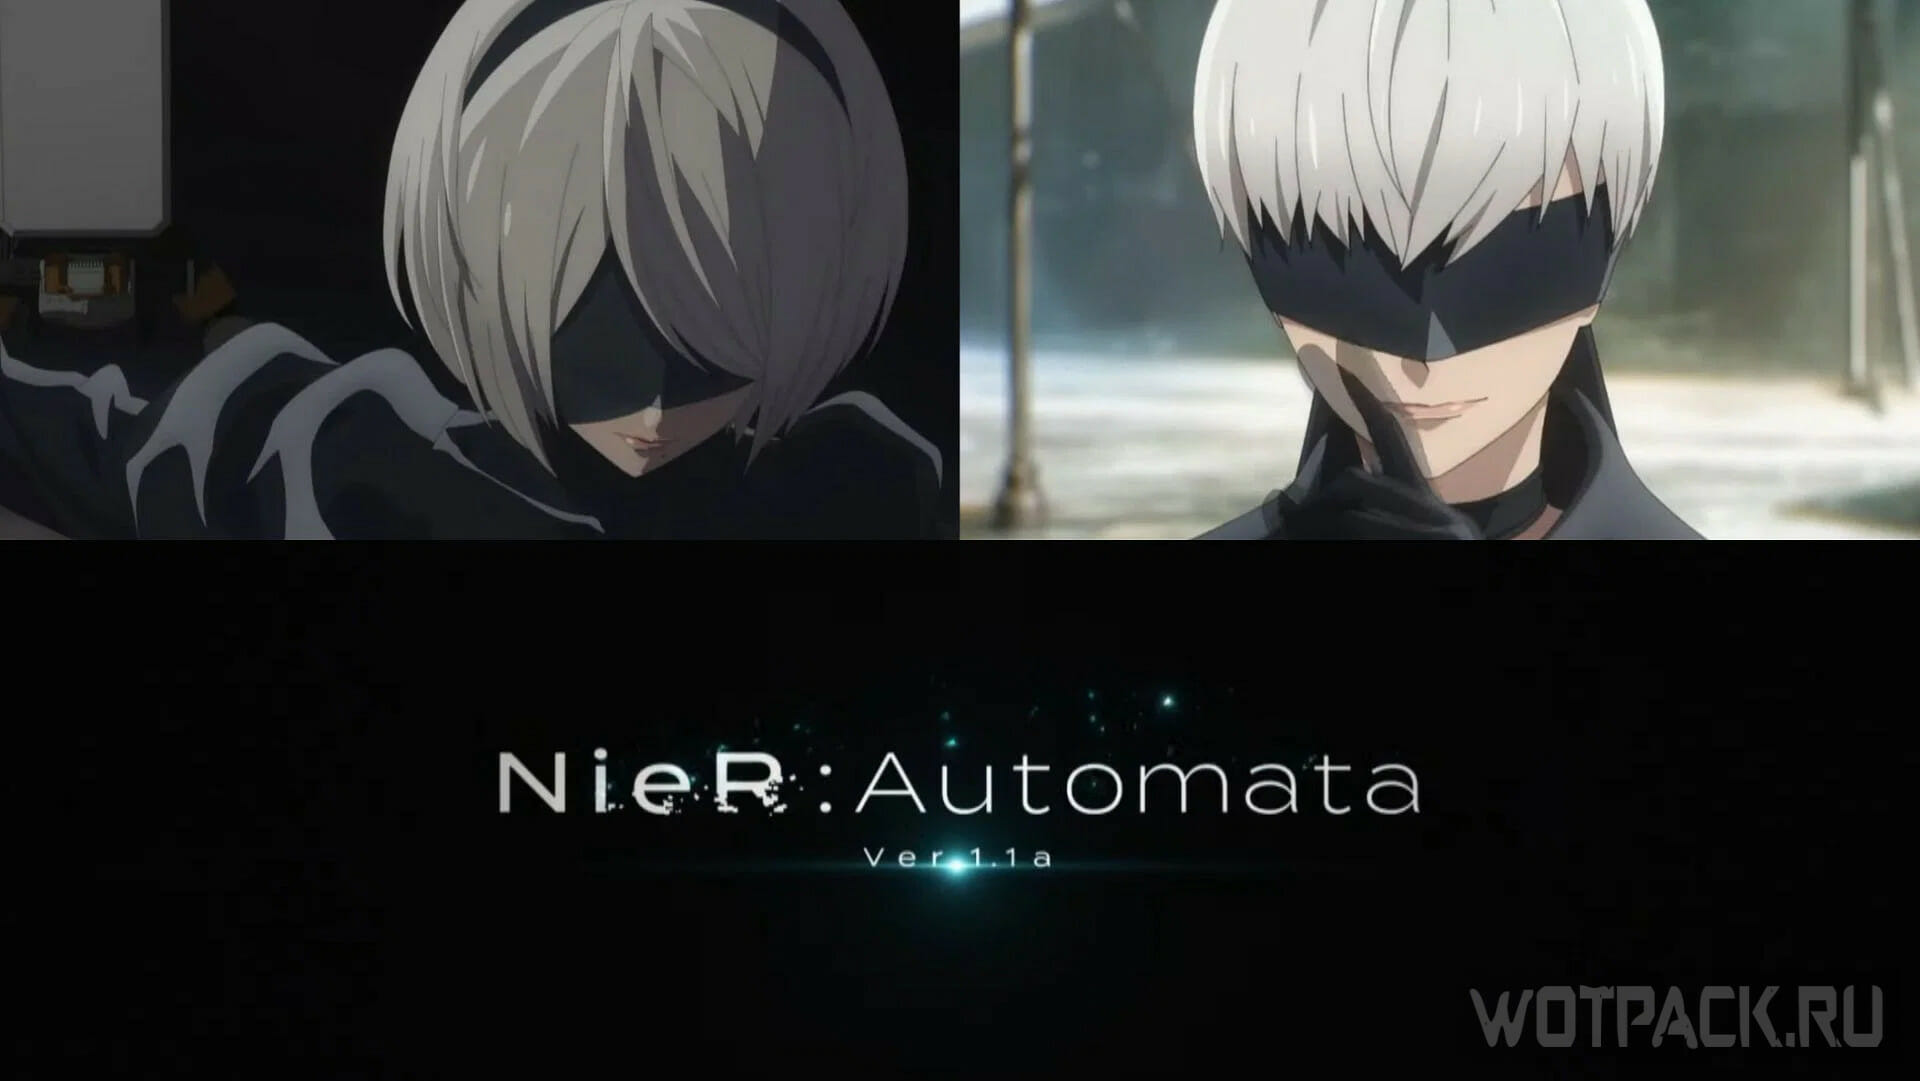 NieR:Automata Ver 1.1a Anime's Episodes 9-12 Previewed in Teaser Video -  News - Anime News Network